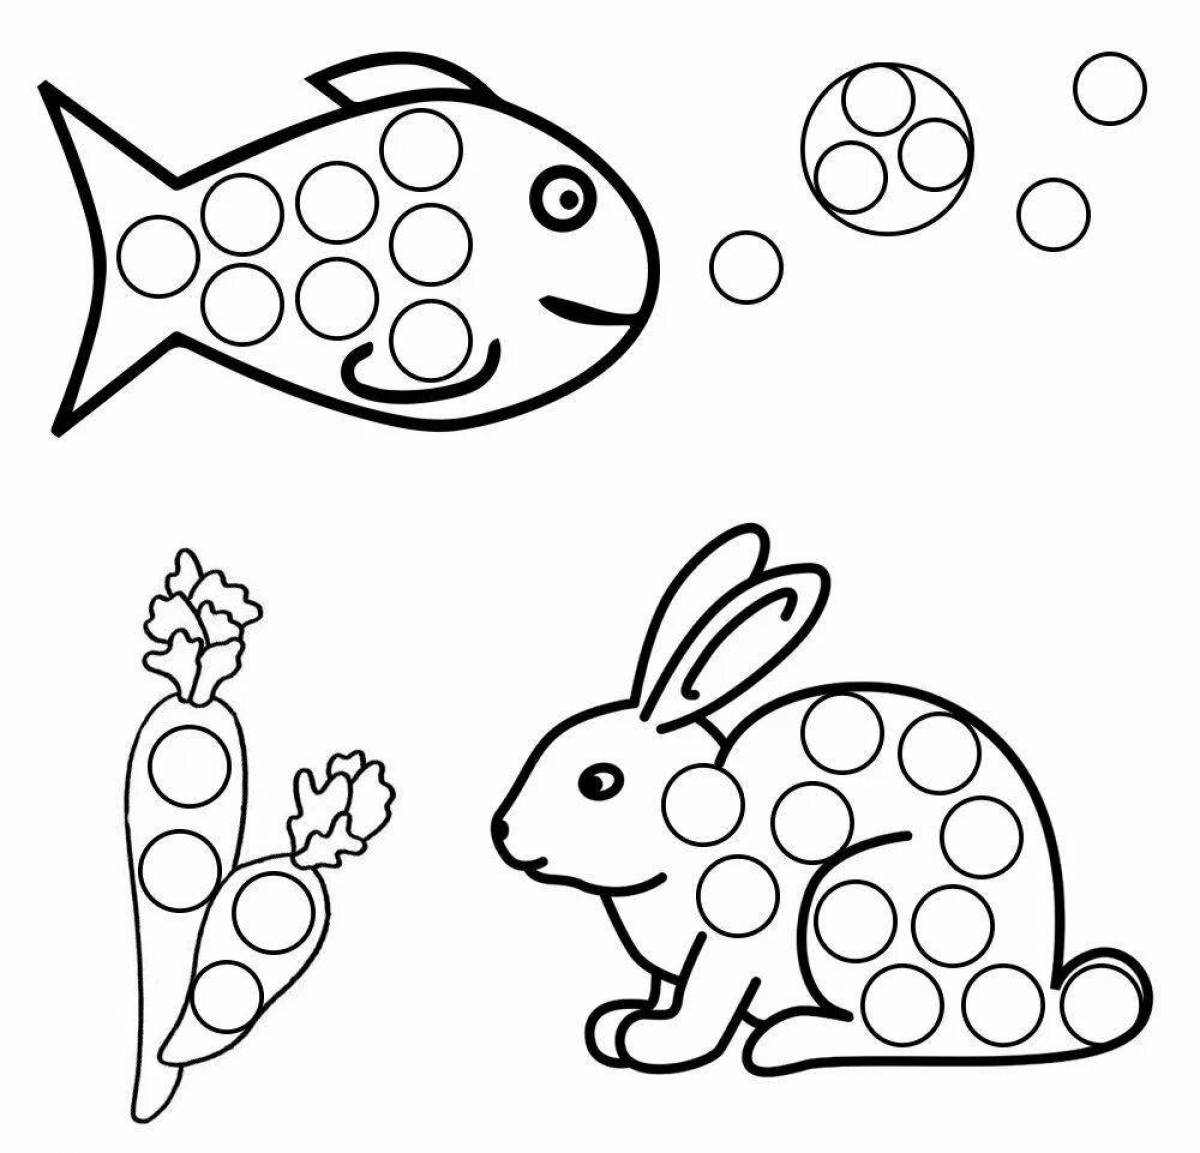 Playful finger coloring page for kids